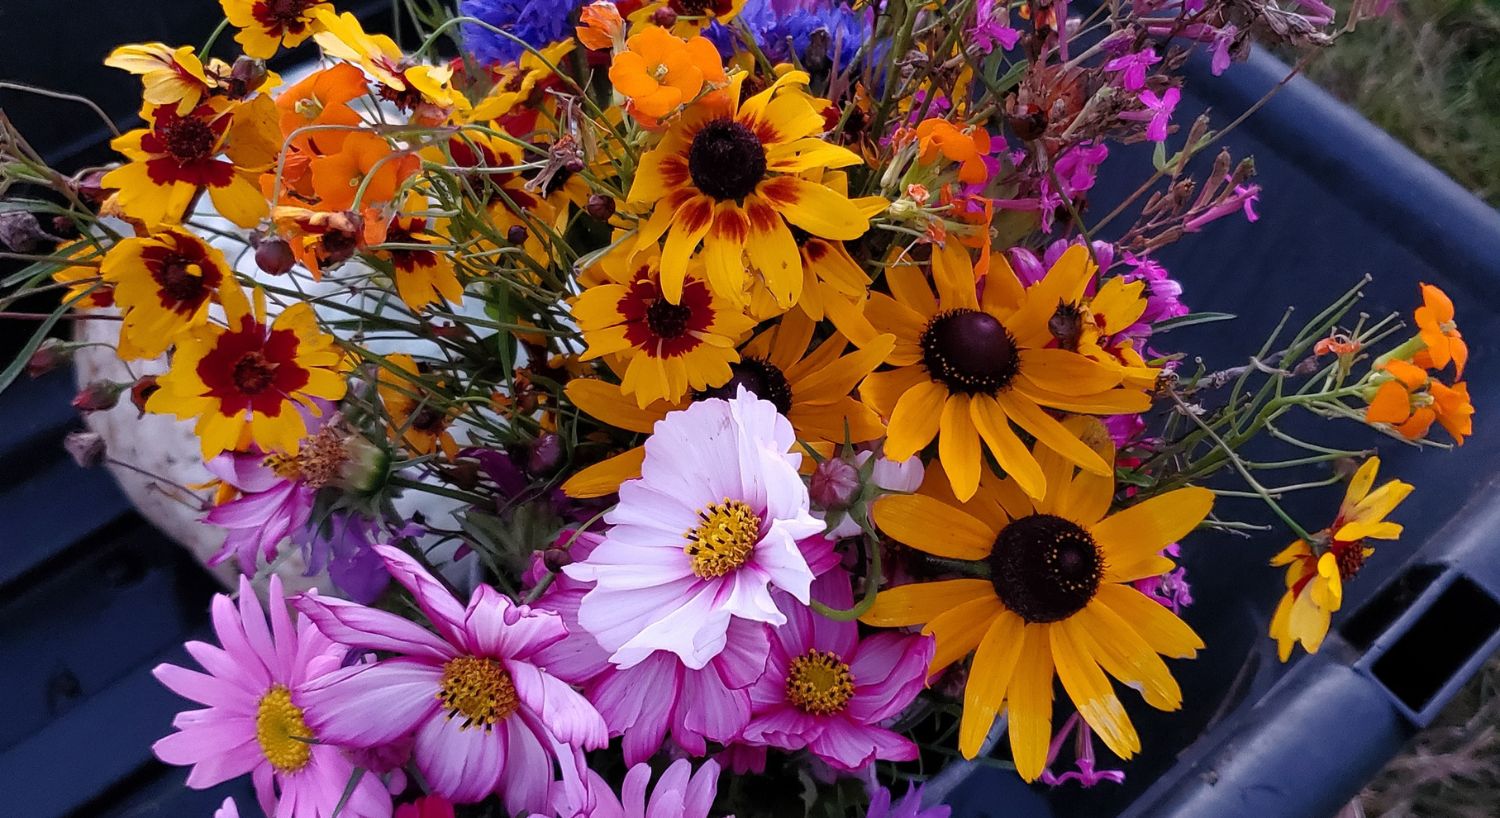 A bunch of different colorful spring flowers already picked and put in a rustic container